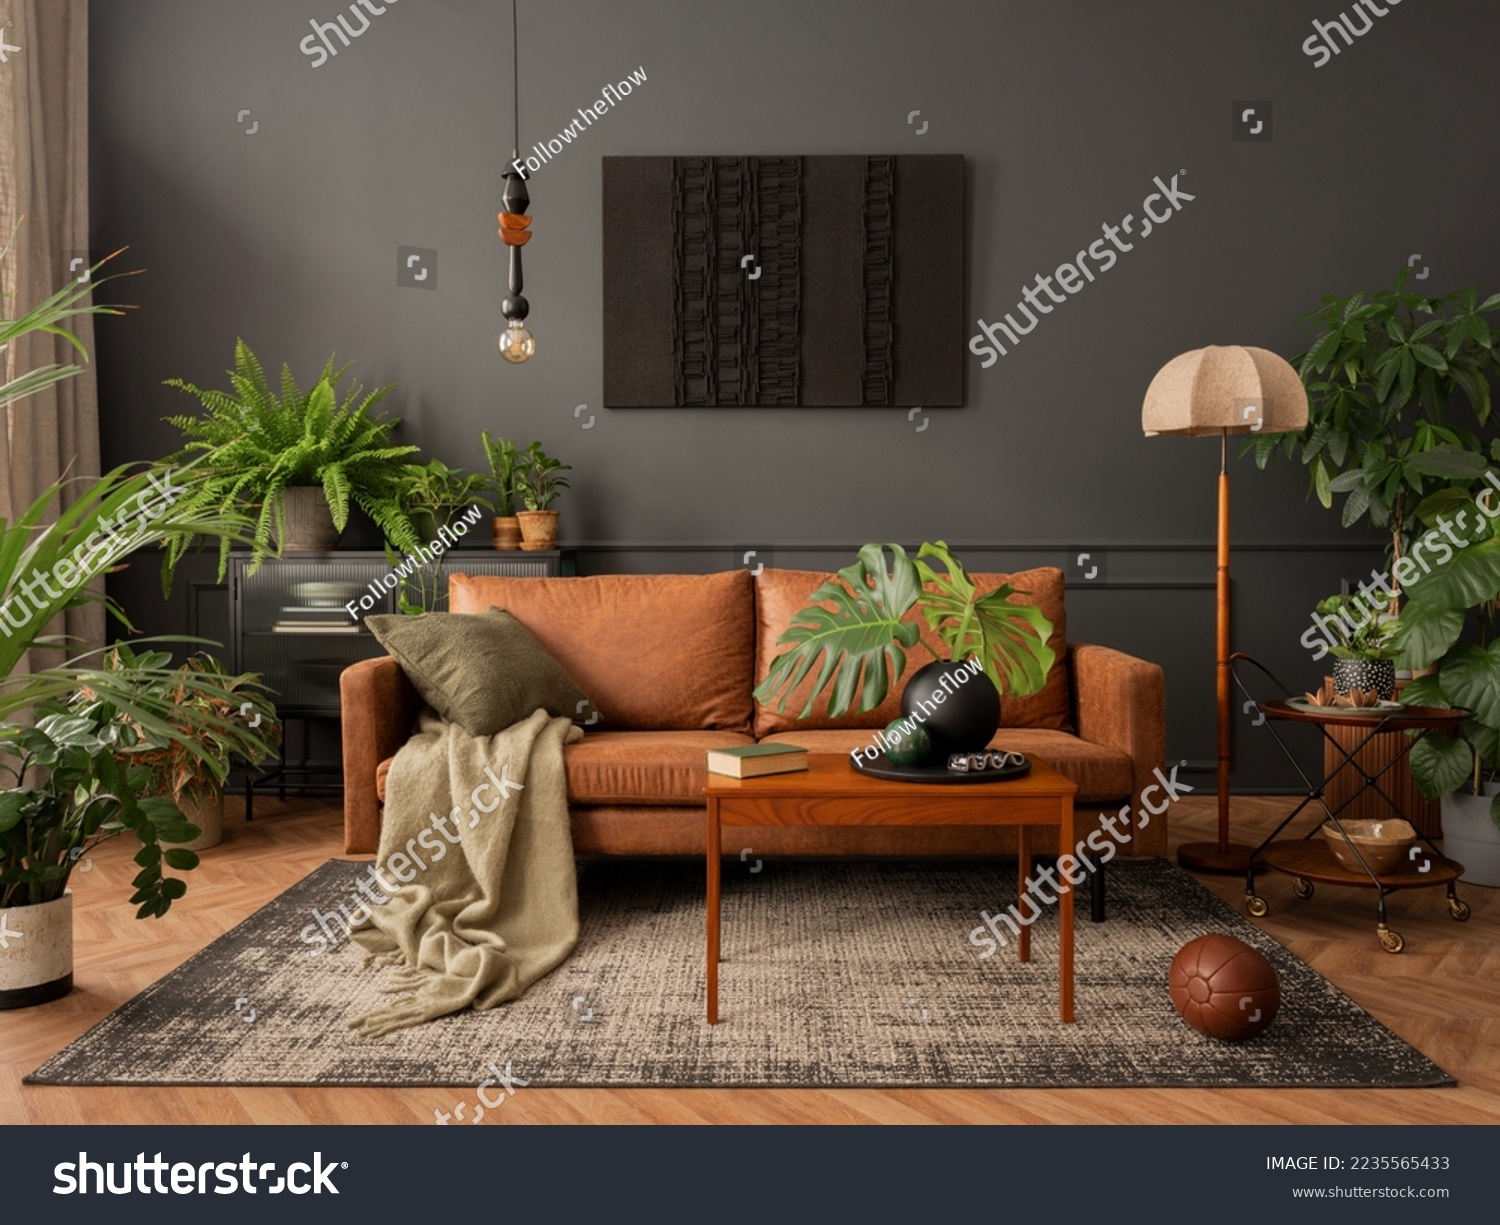 Interior design of living room interior with mock up poster frame, brown sofa, plants, wooden coffee table, lamp, ball, stylish rug, plaid, pillows and personal accessories. Home decor. Template.  #2235565433